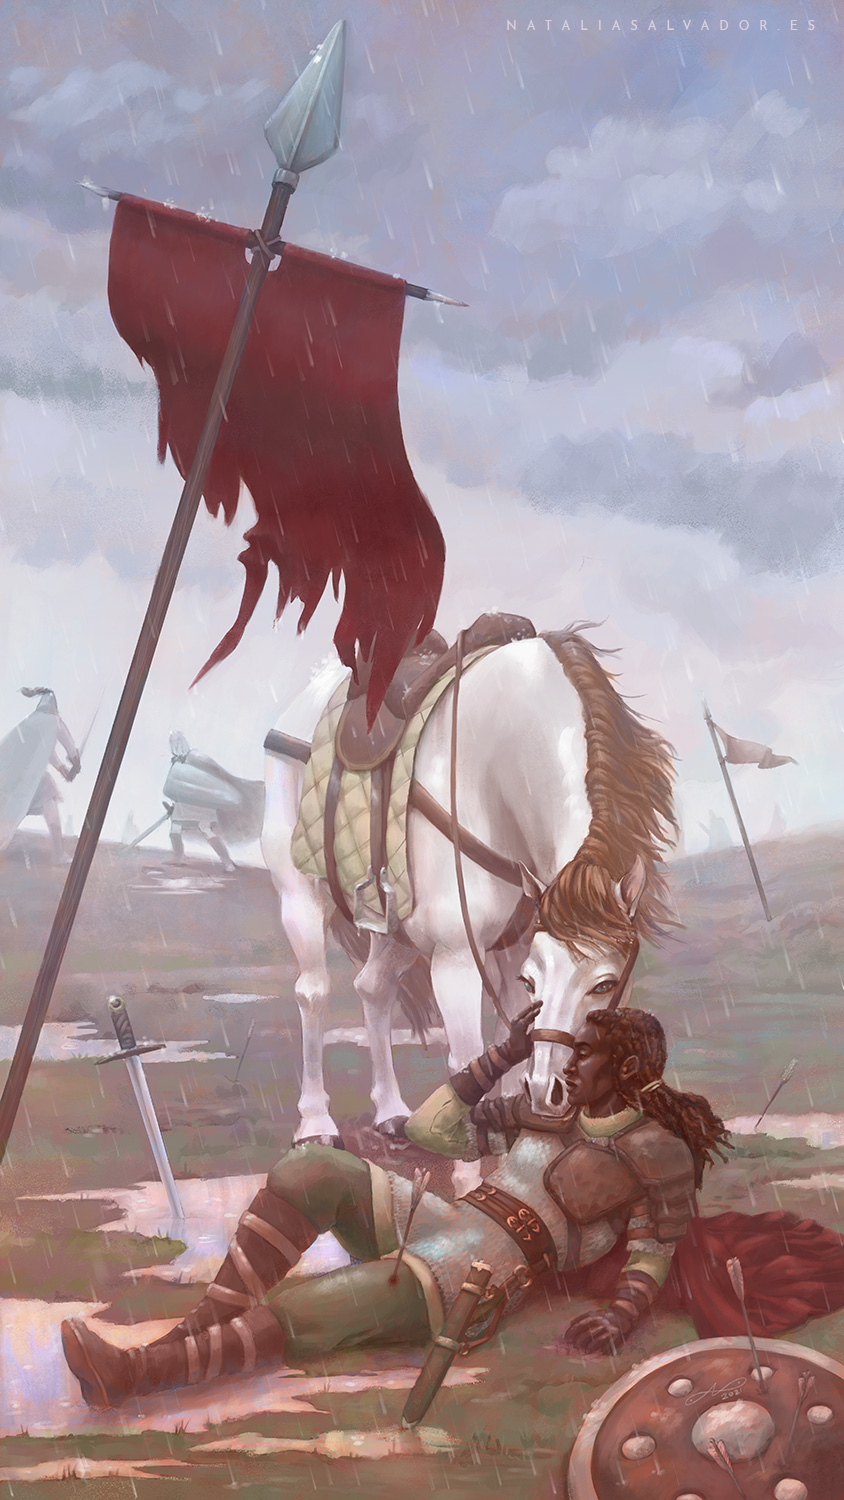 Digital illustration of a fallen wounded soldier and its horse under the rain